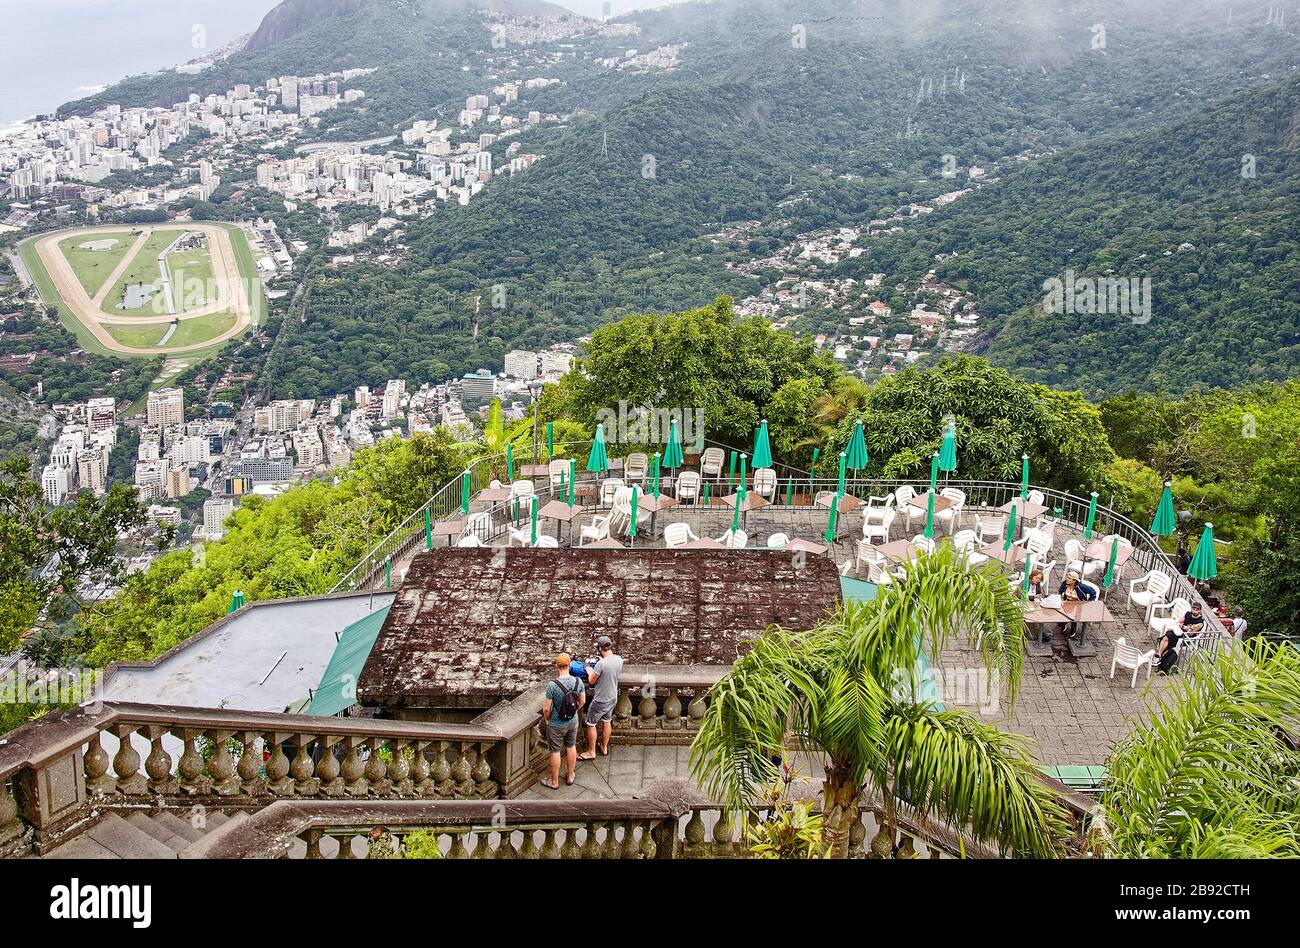 city overview, from Corcovado Mountain; foggy; outdoor restaurant, tables, chairs, stone steps, people, distant buildings, vegetation, South America; Stock Photo